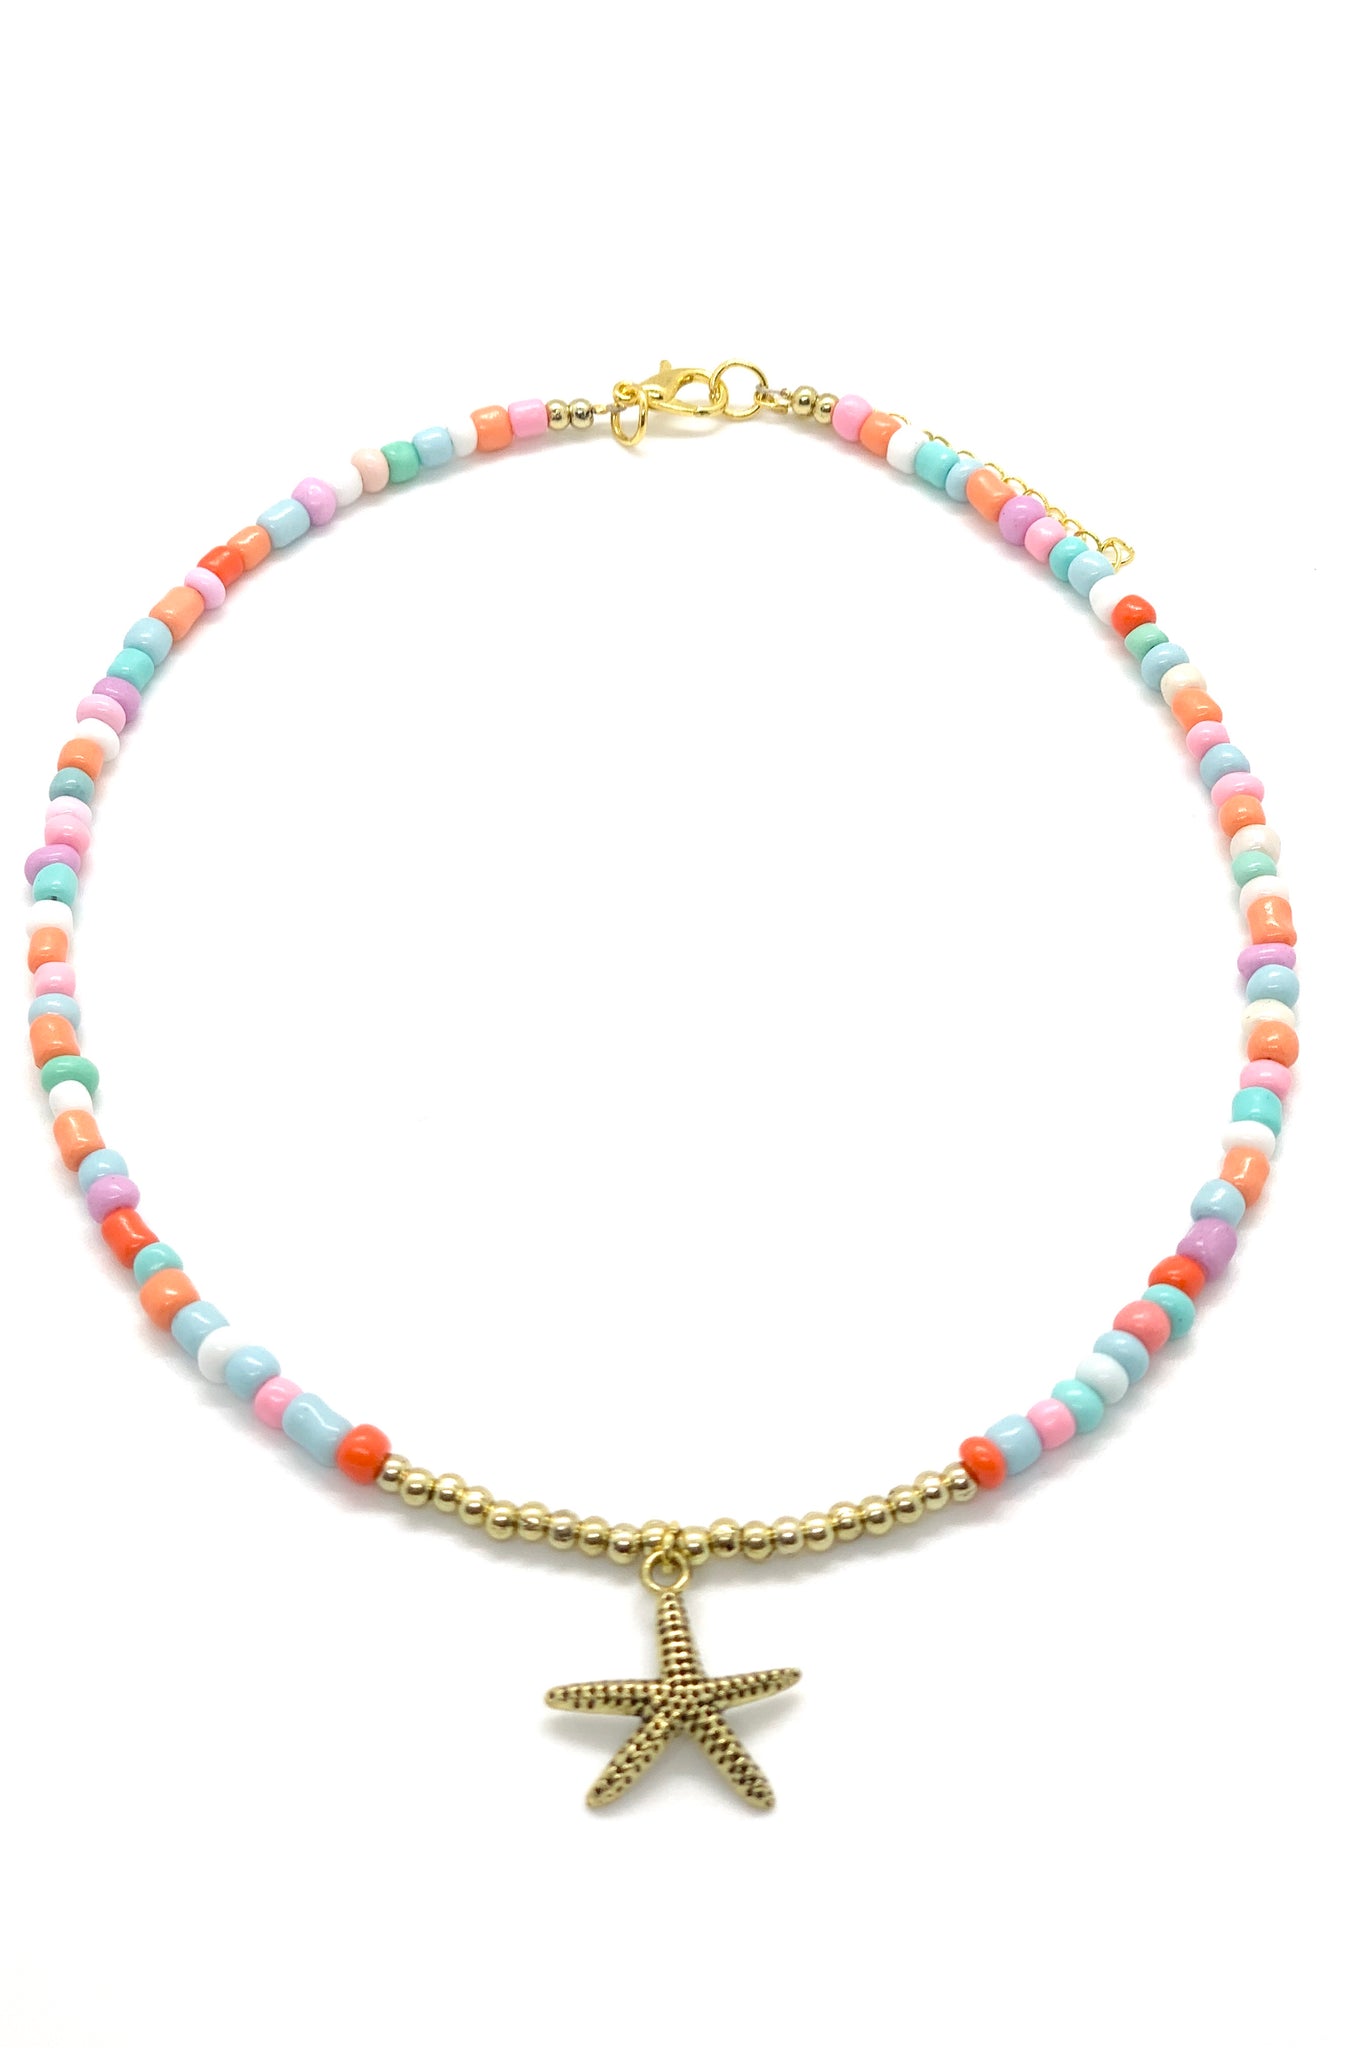 Short colouful necklace with seastar charm